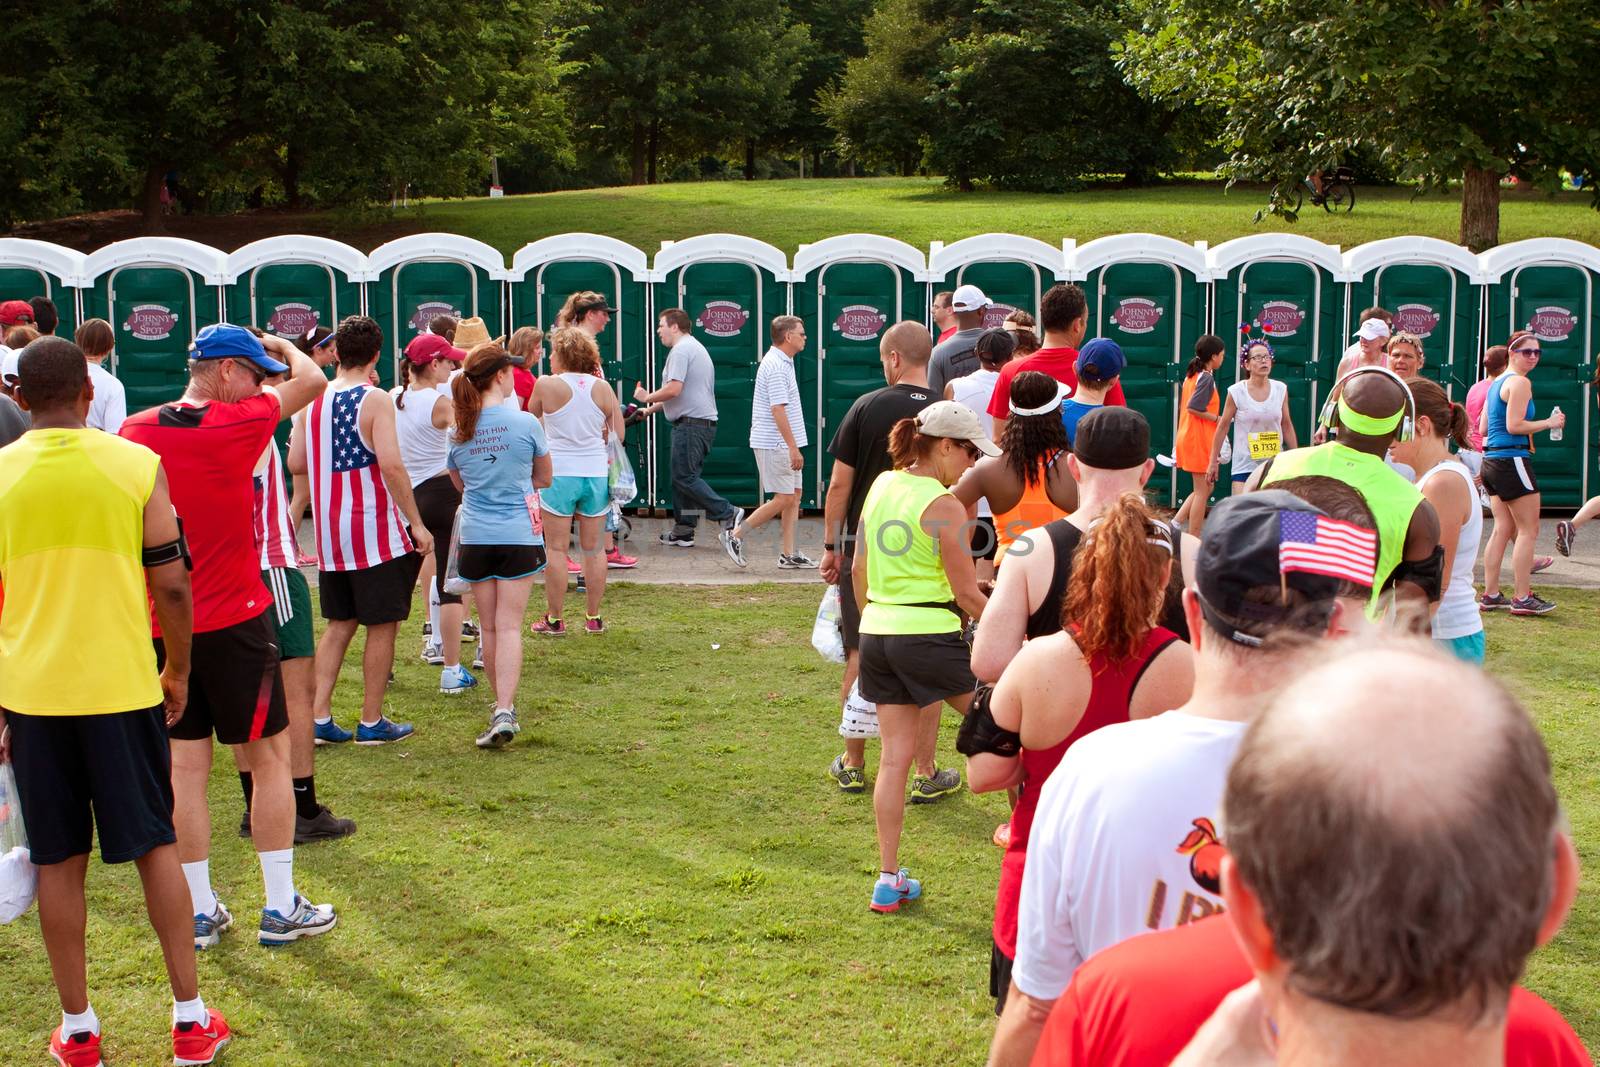 Atlanta, GA, USA - July 4, 2014:  Exhausted runners wait in long lines to use a Johnny On The Spot portable toilet, after just completing the Peachtree Road Race 10K.  